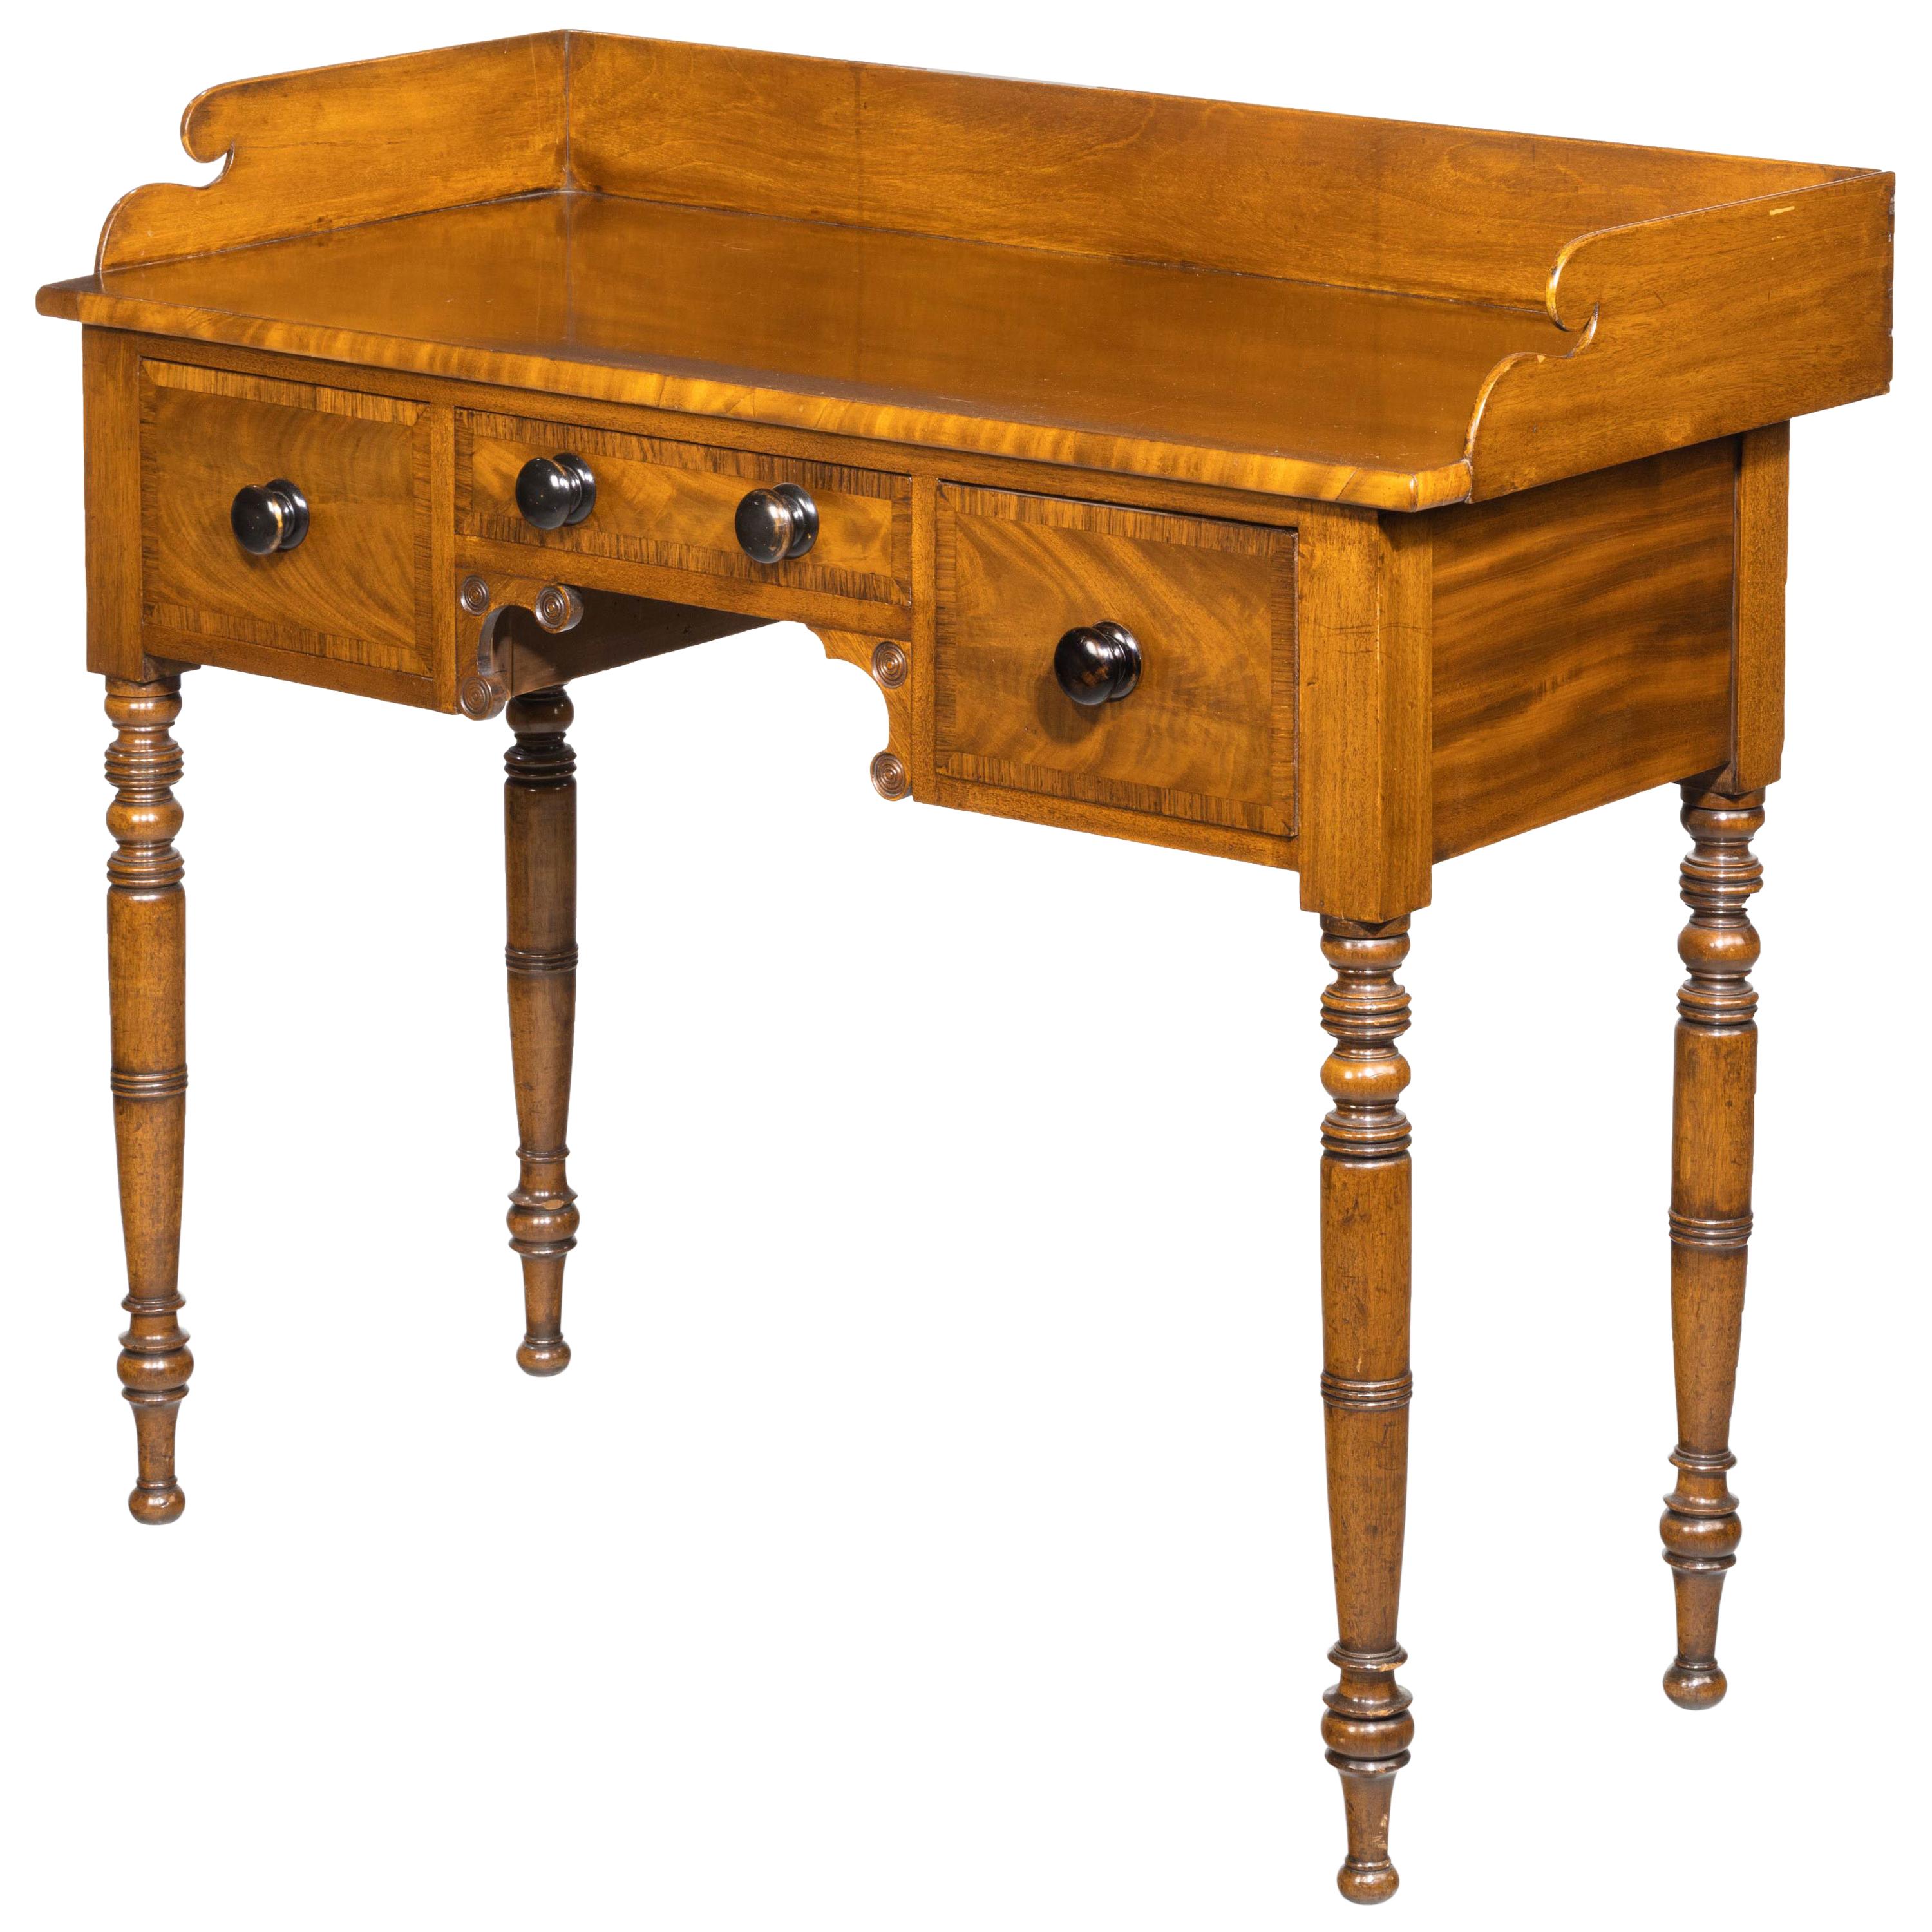 William IV Period Side or Serving Table in the Manner of Gillows